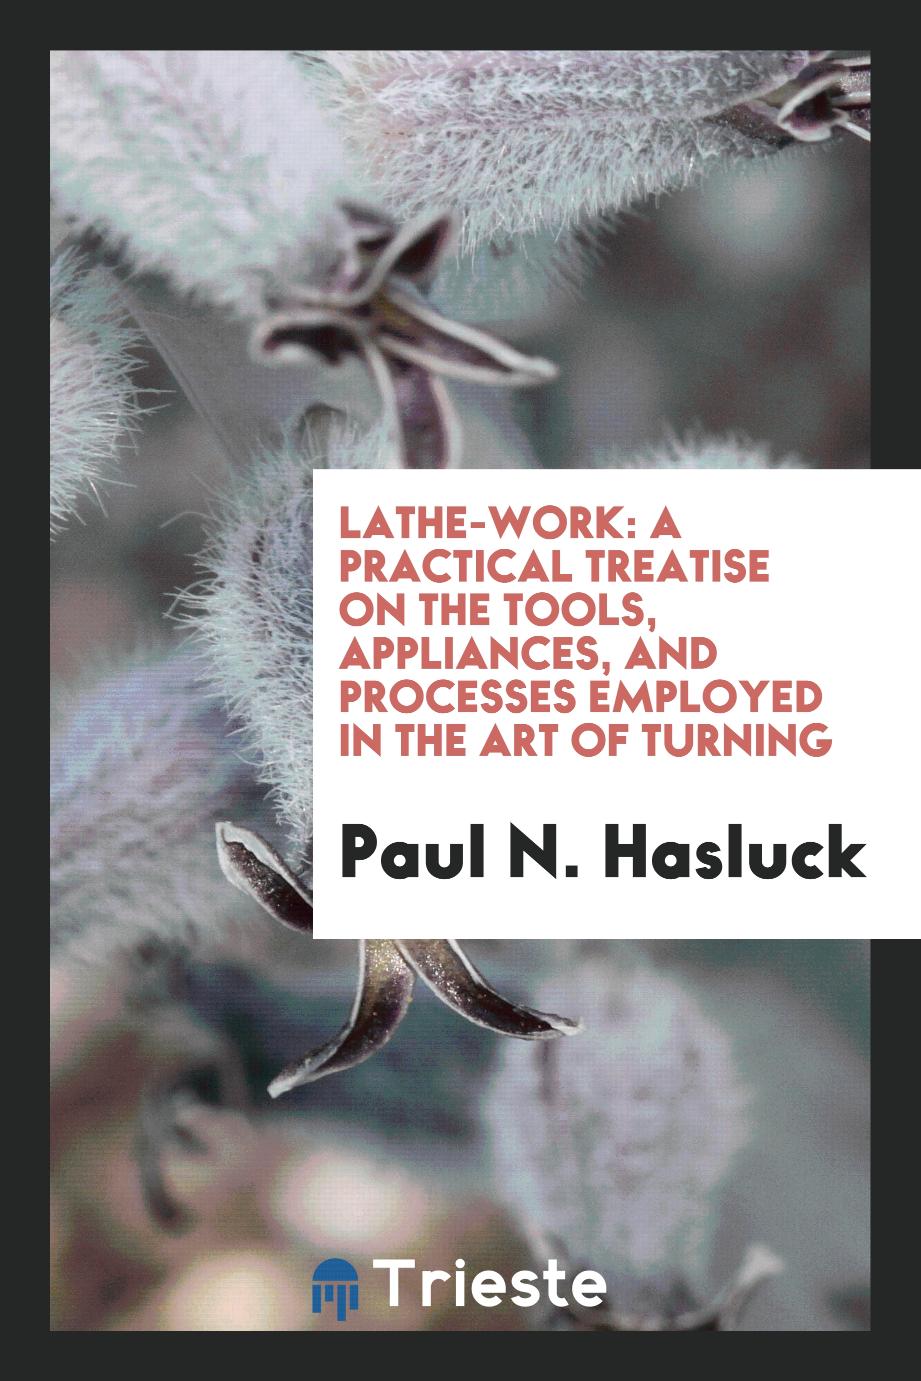 Lathe-Work: A Practical Treatise on the Tools, Appliances, and Processes Employed in the Art of Turning